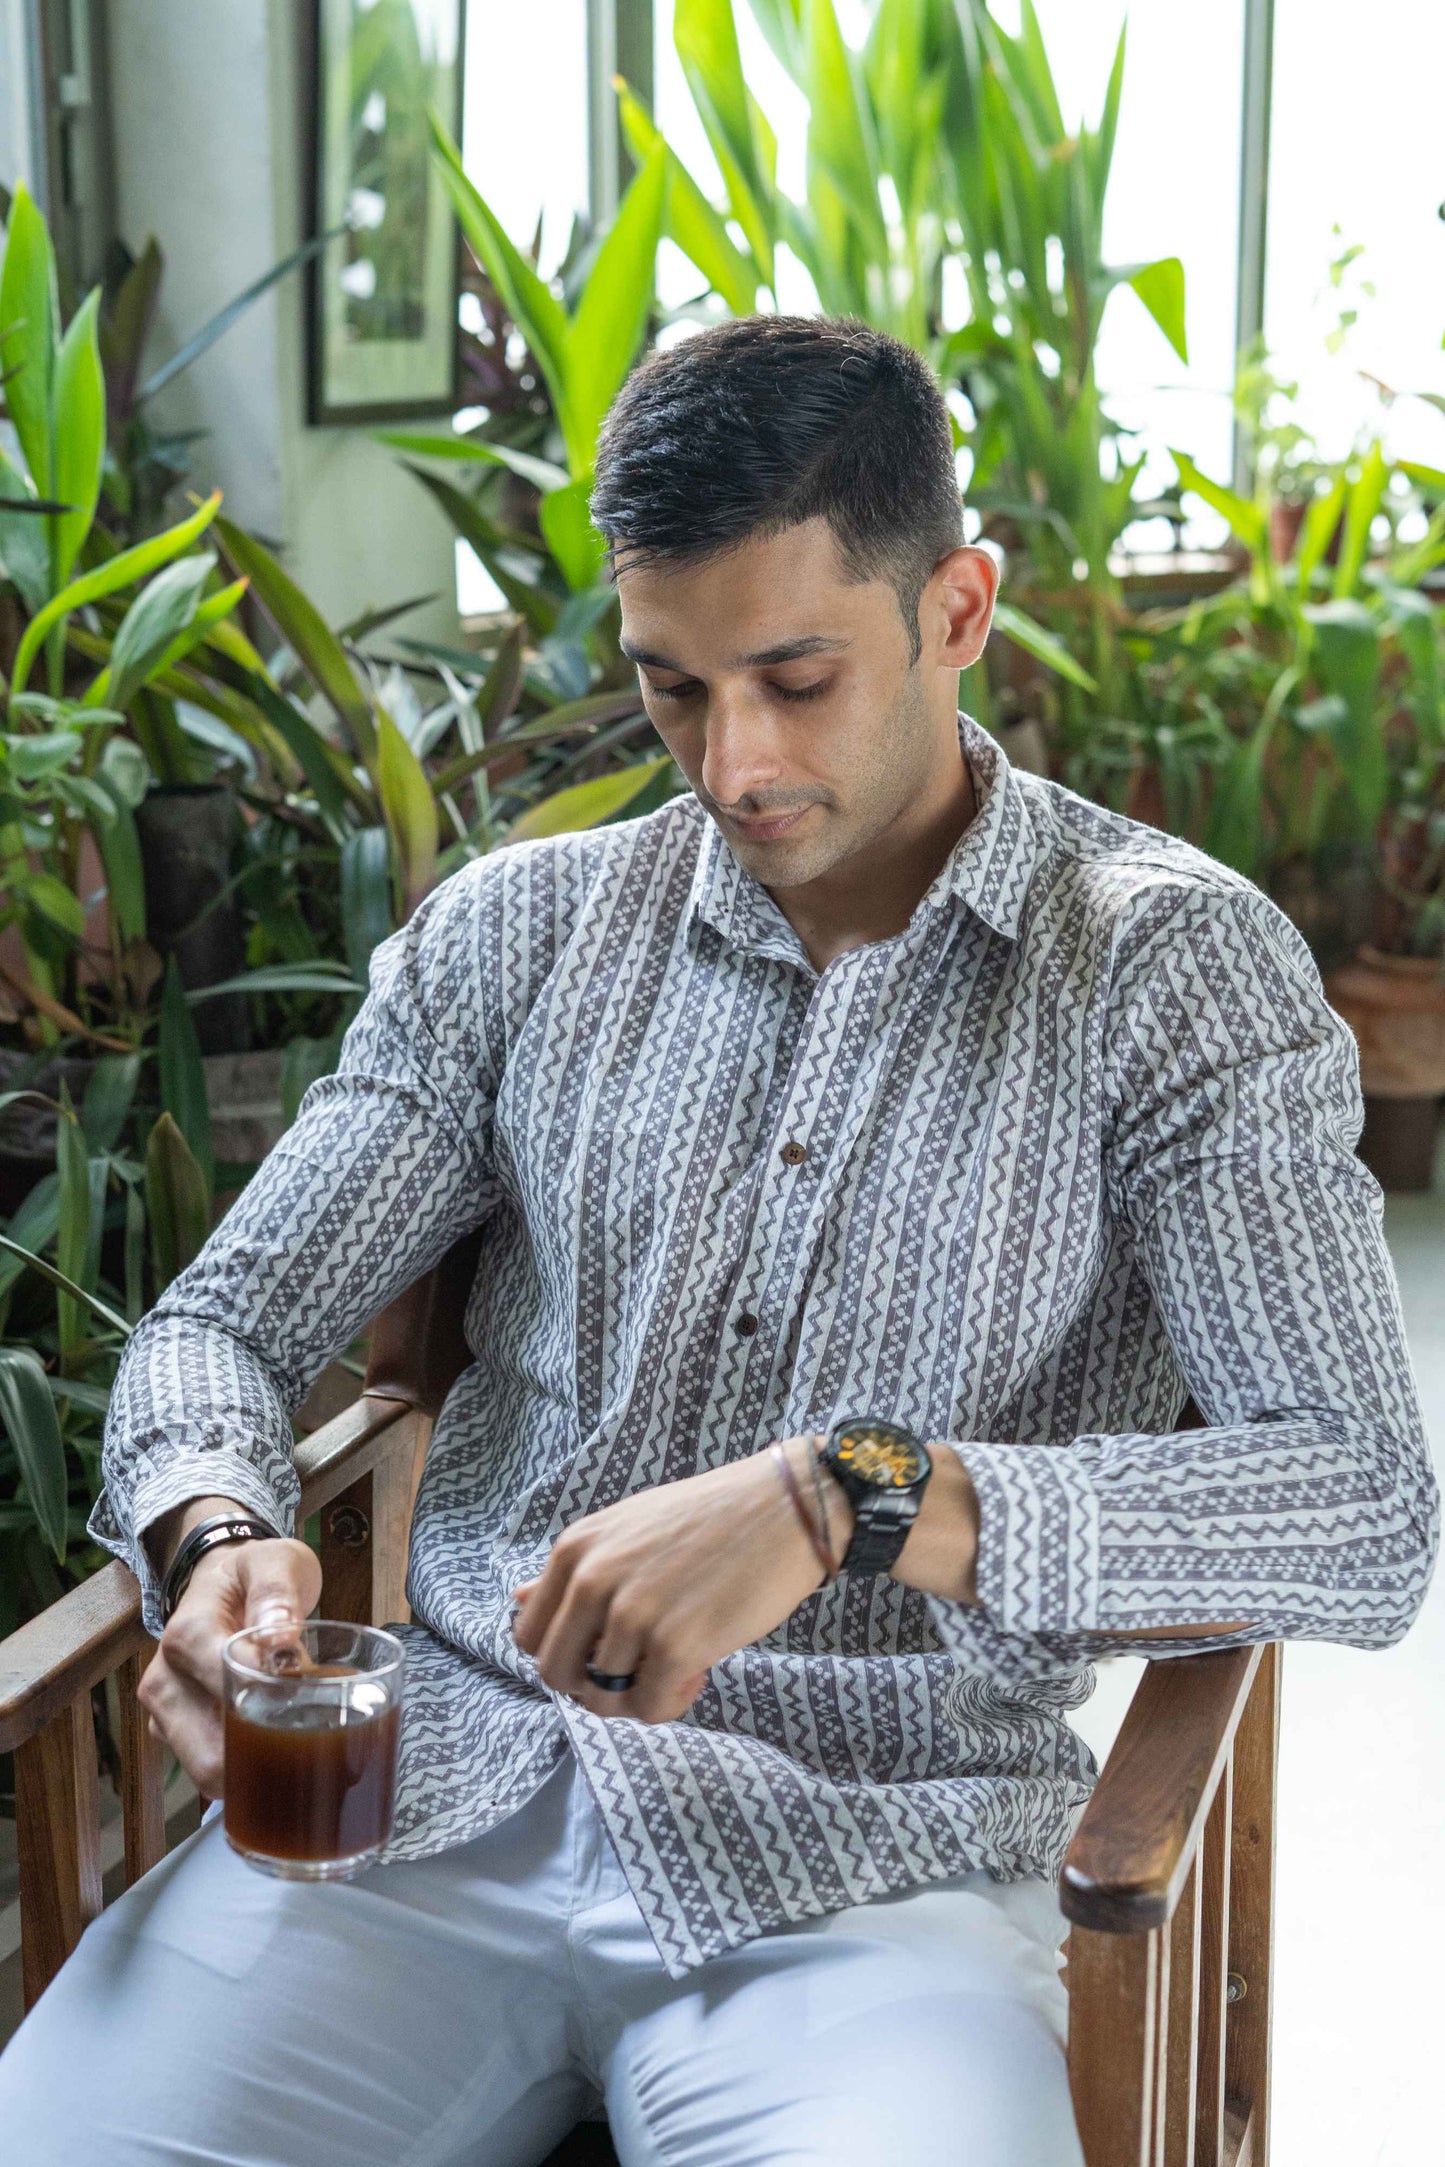 The White Kantha Work Shirt With Striped Tribal Print